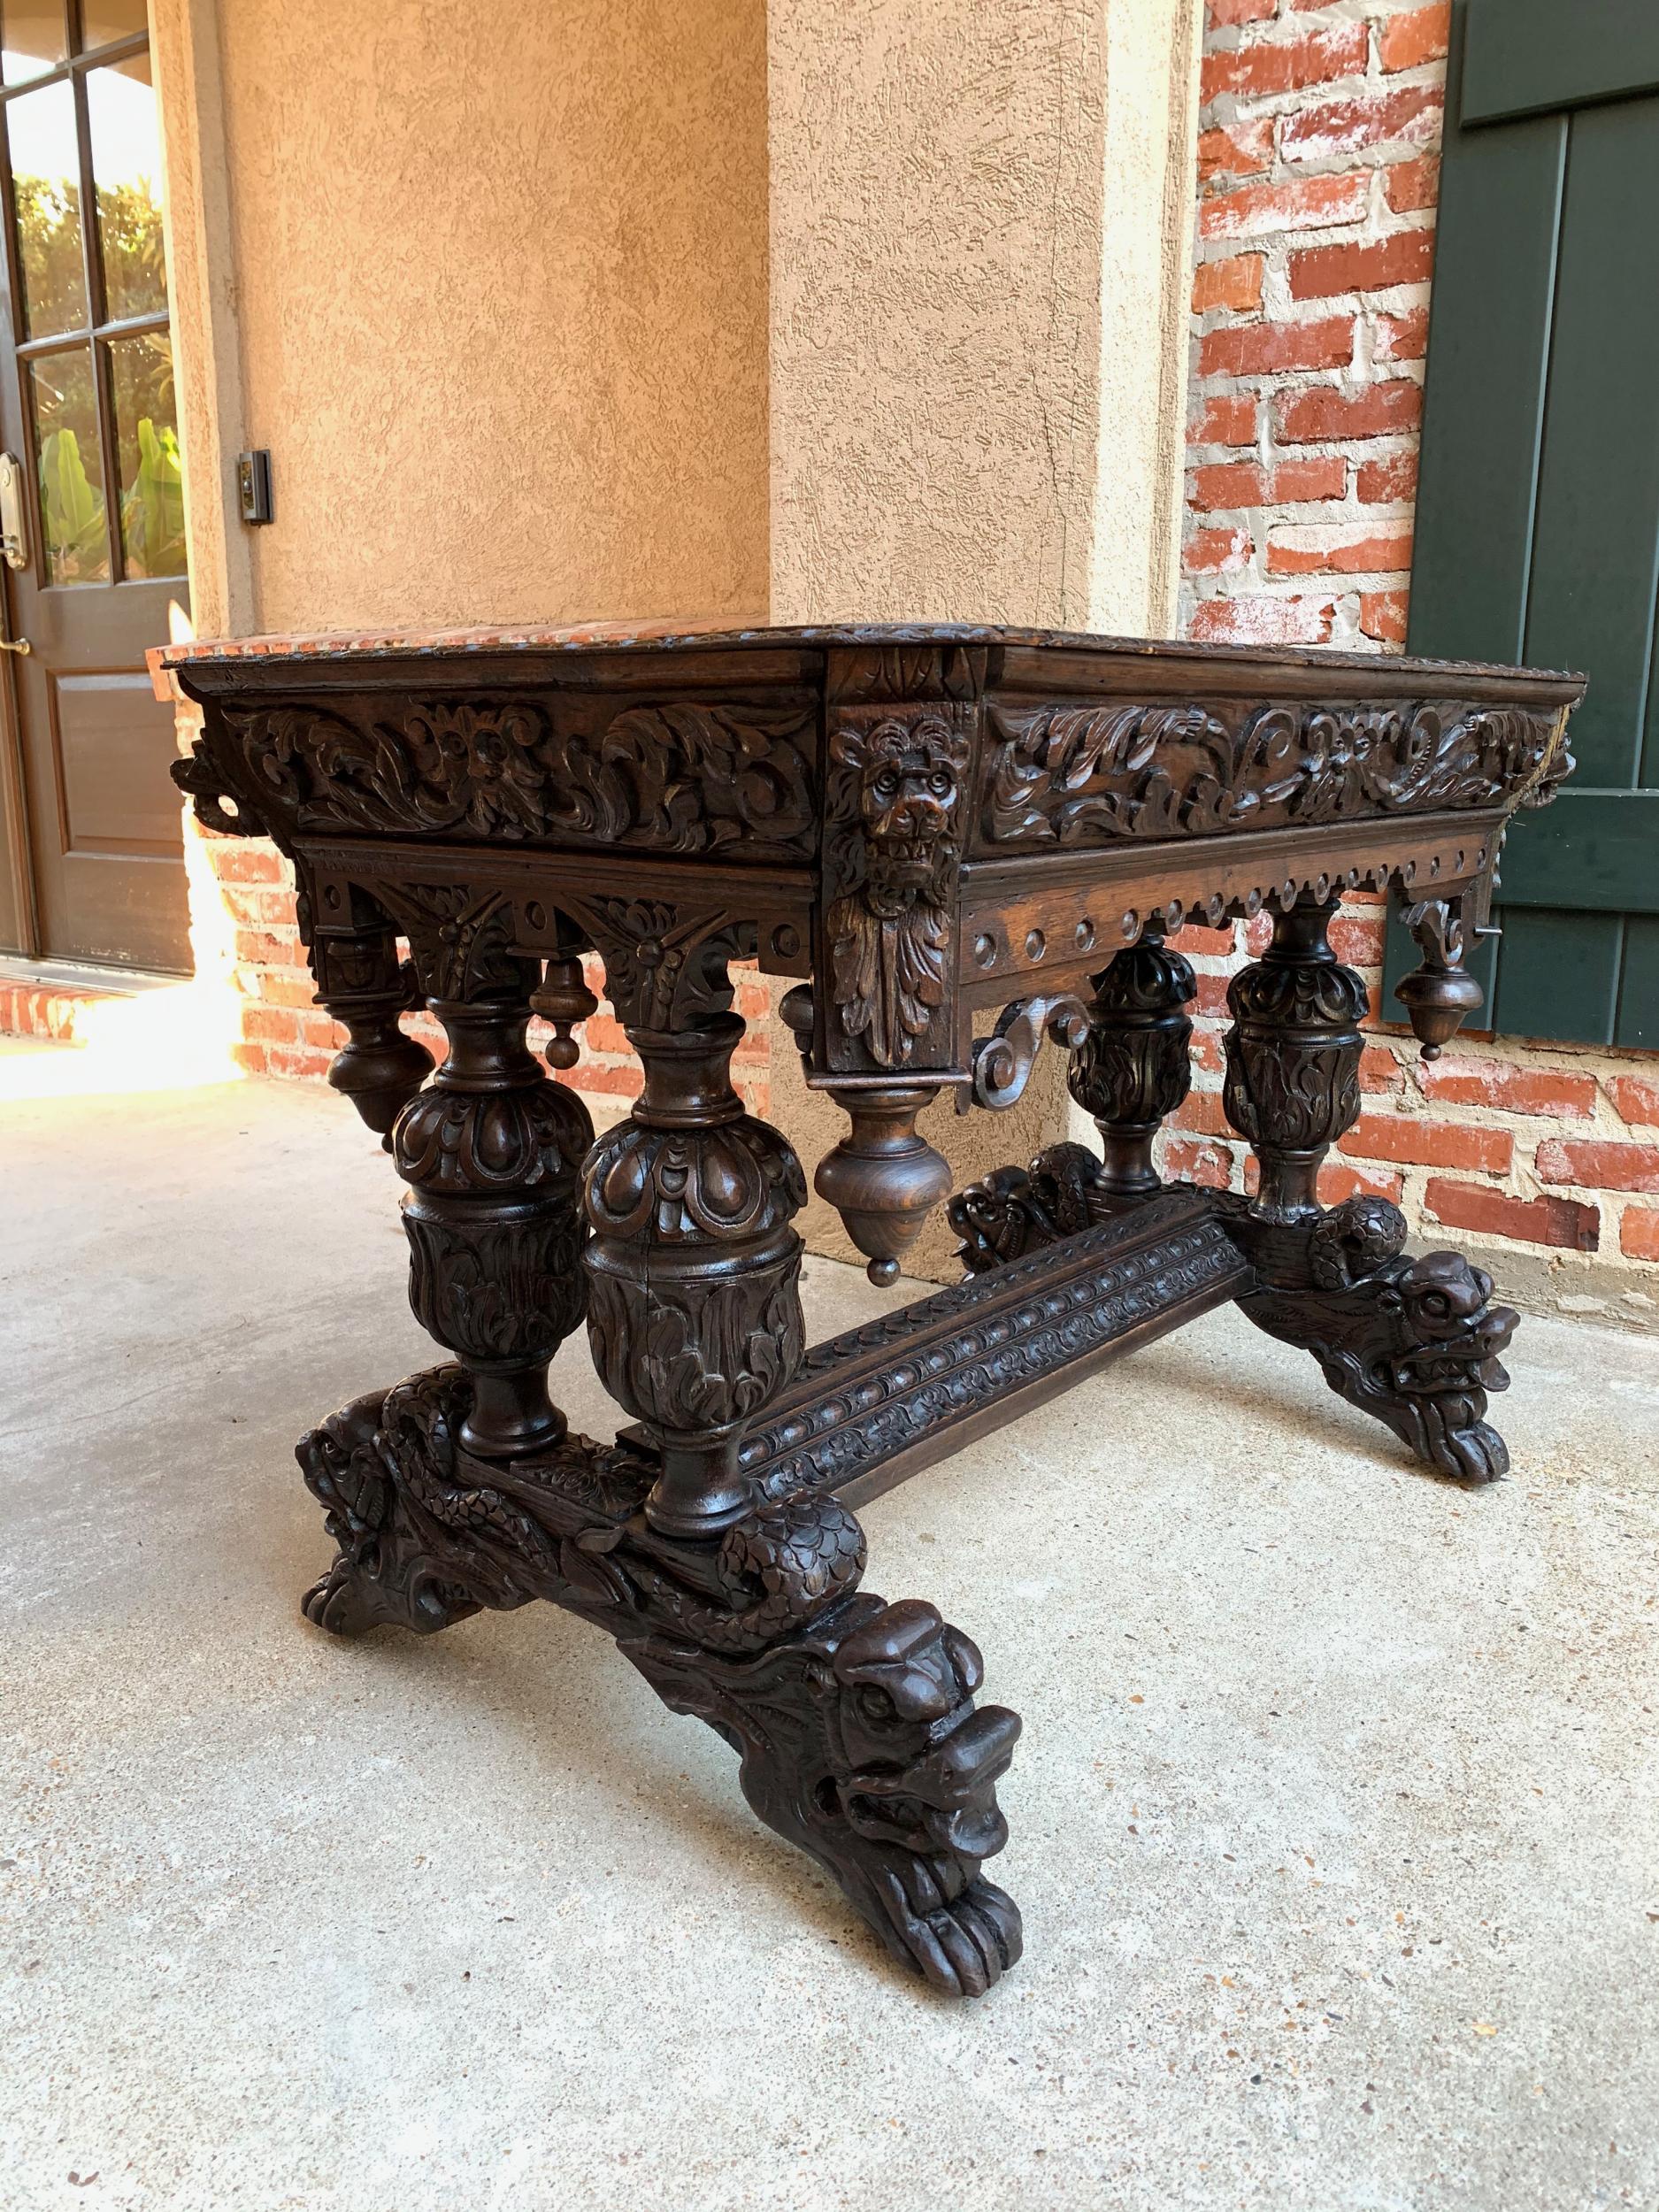 19th century French carved oak side table writing desk renaissance gothic

~Direct from France~
An elegant antique French carved library table or 